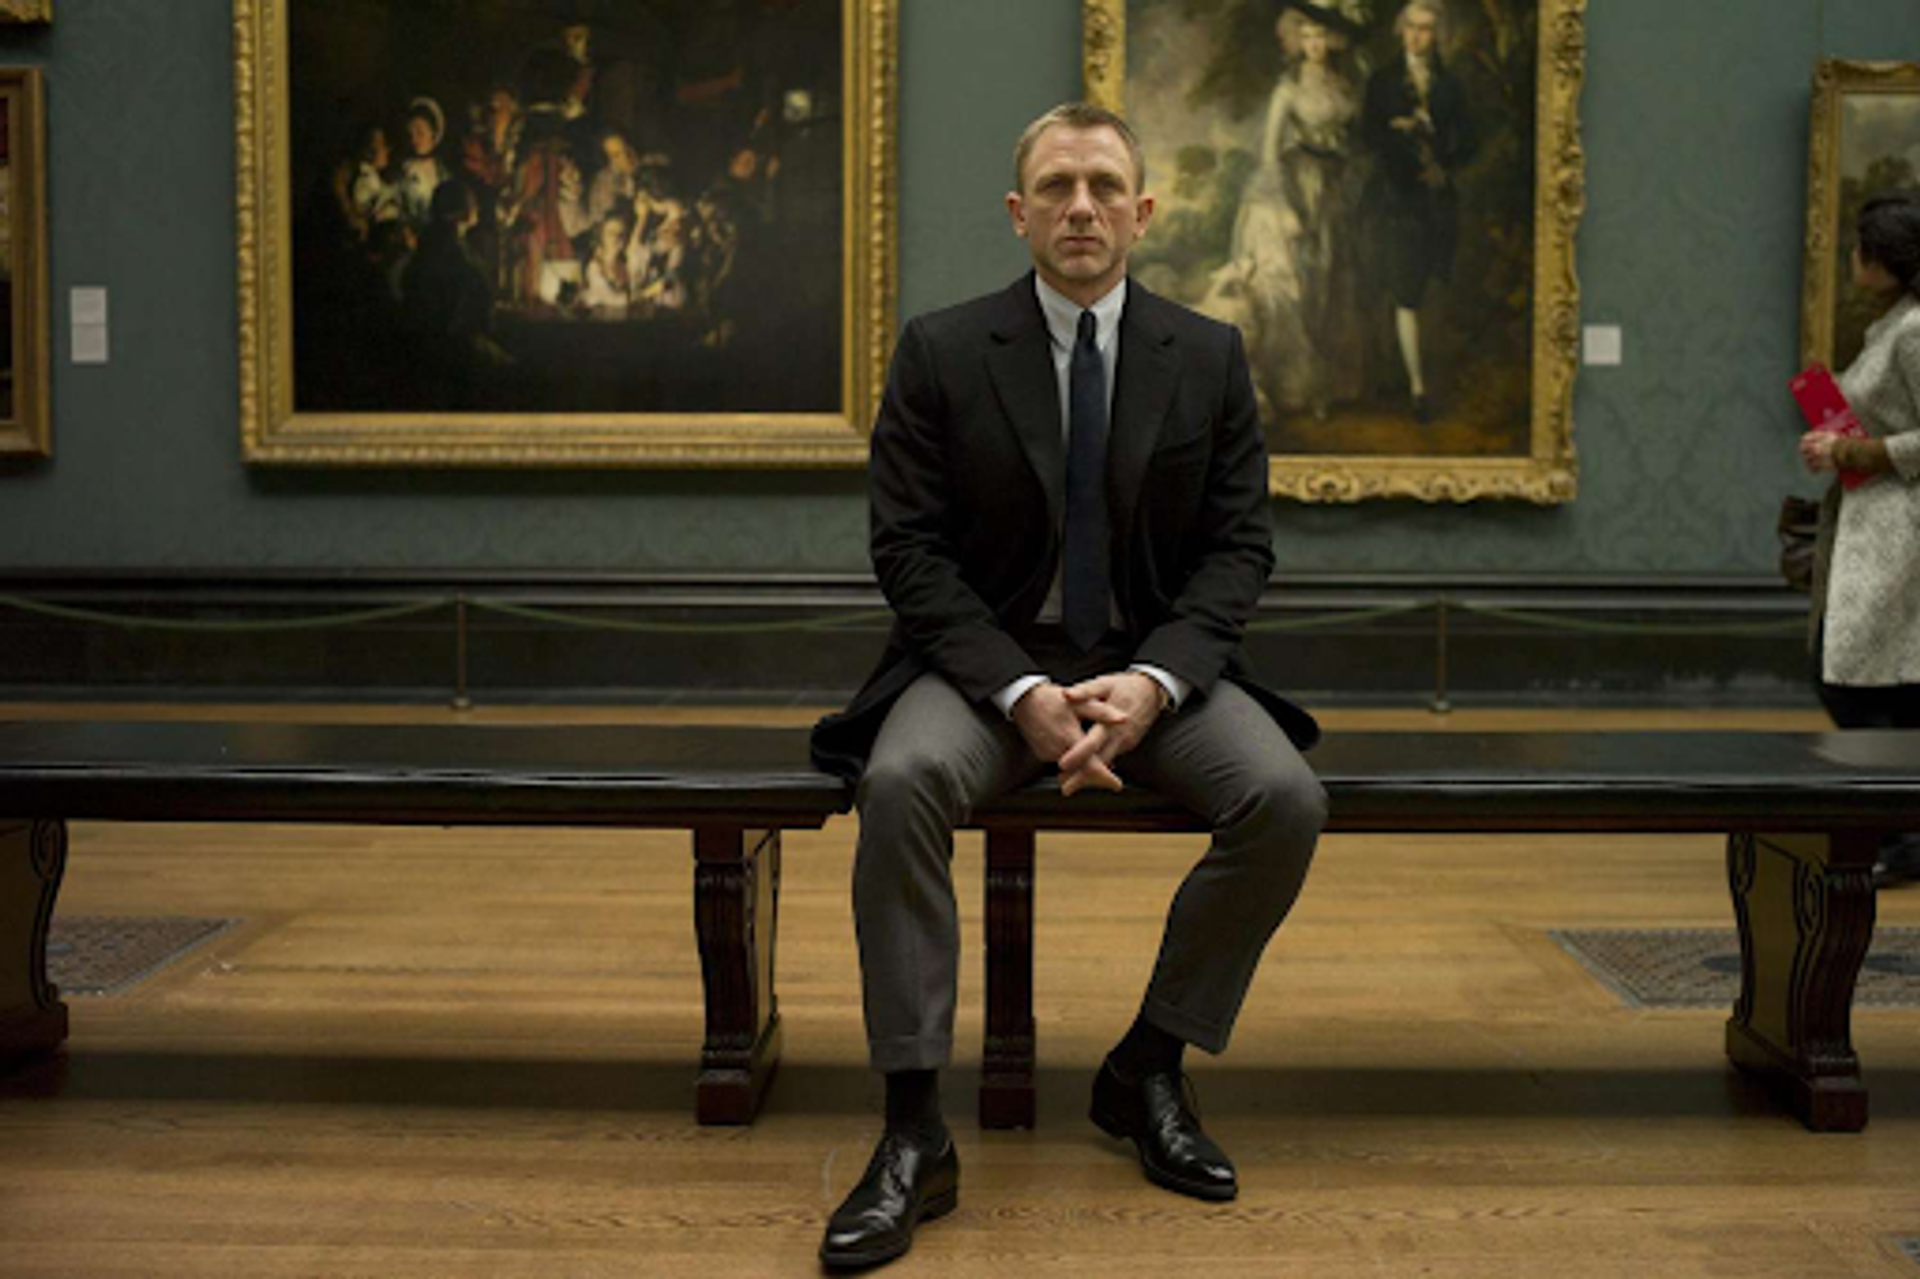 Photograph from the film Skyfall. Man sitting on a bench inside an art gallery.